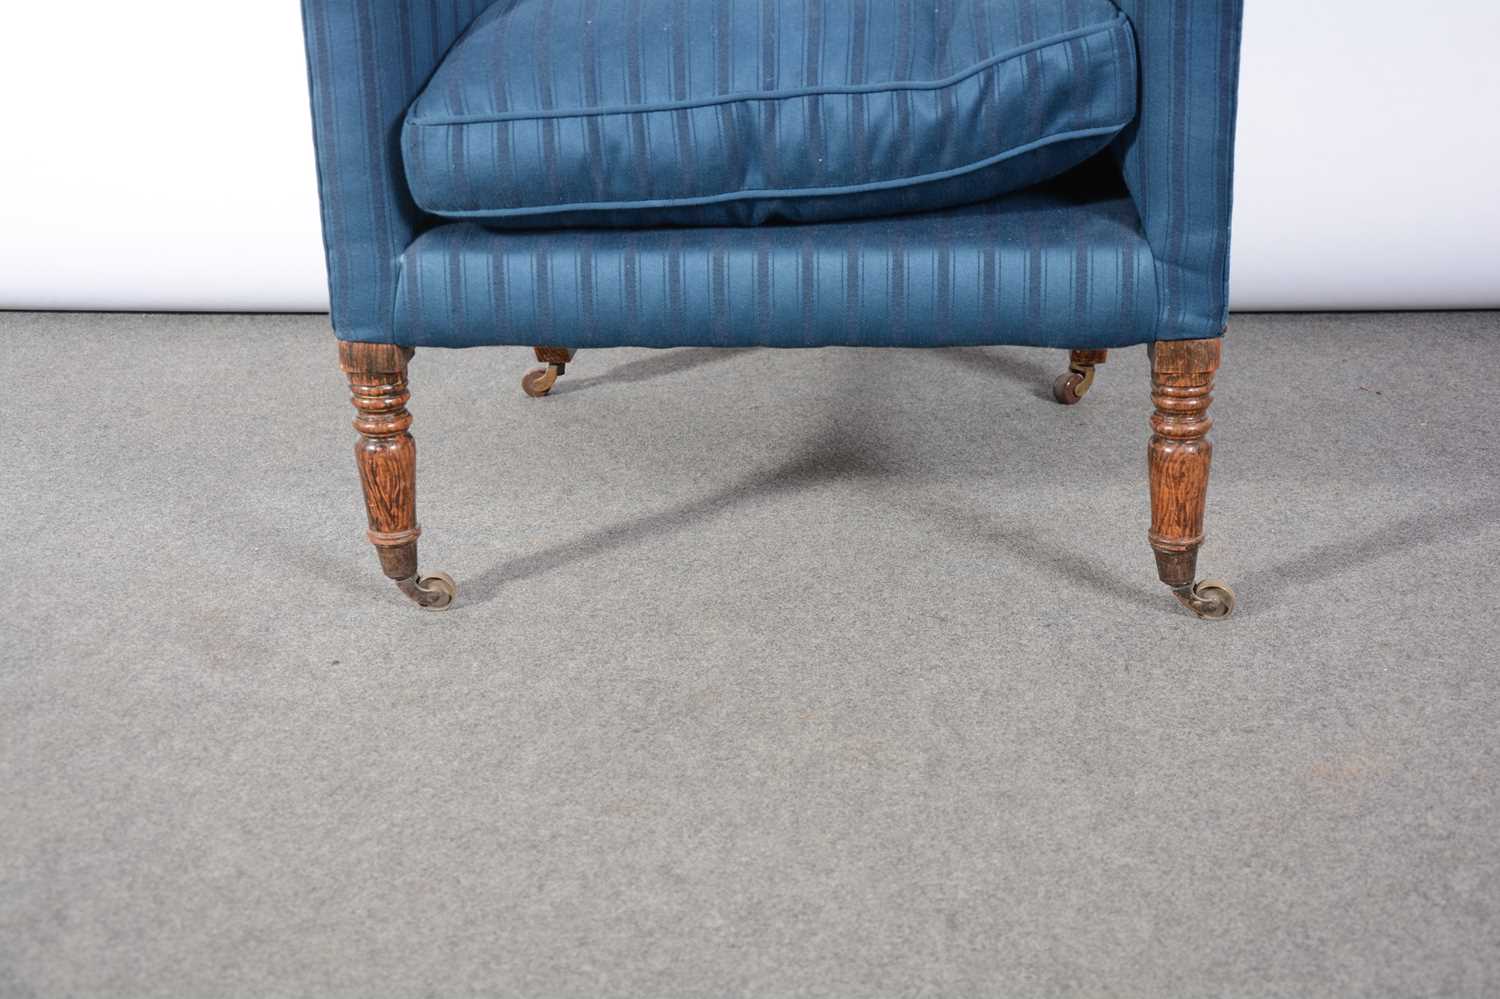 A Regency style simulated rosewood dining chair - Image 4 of 5